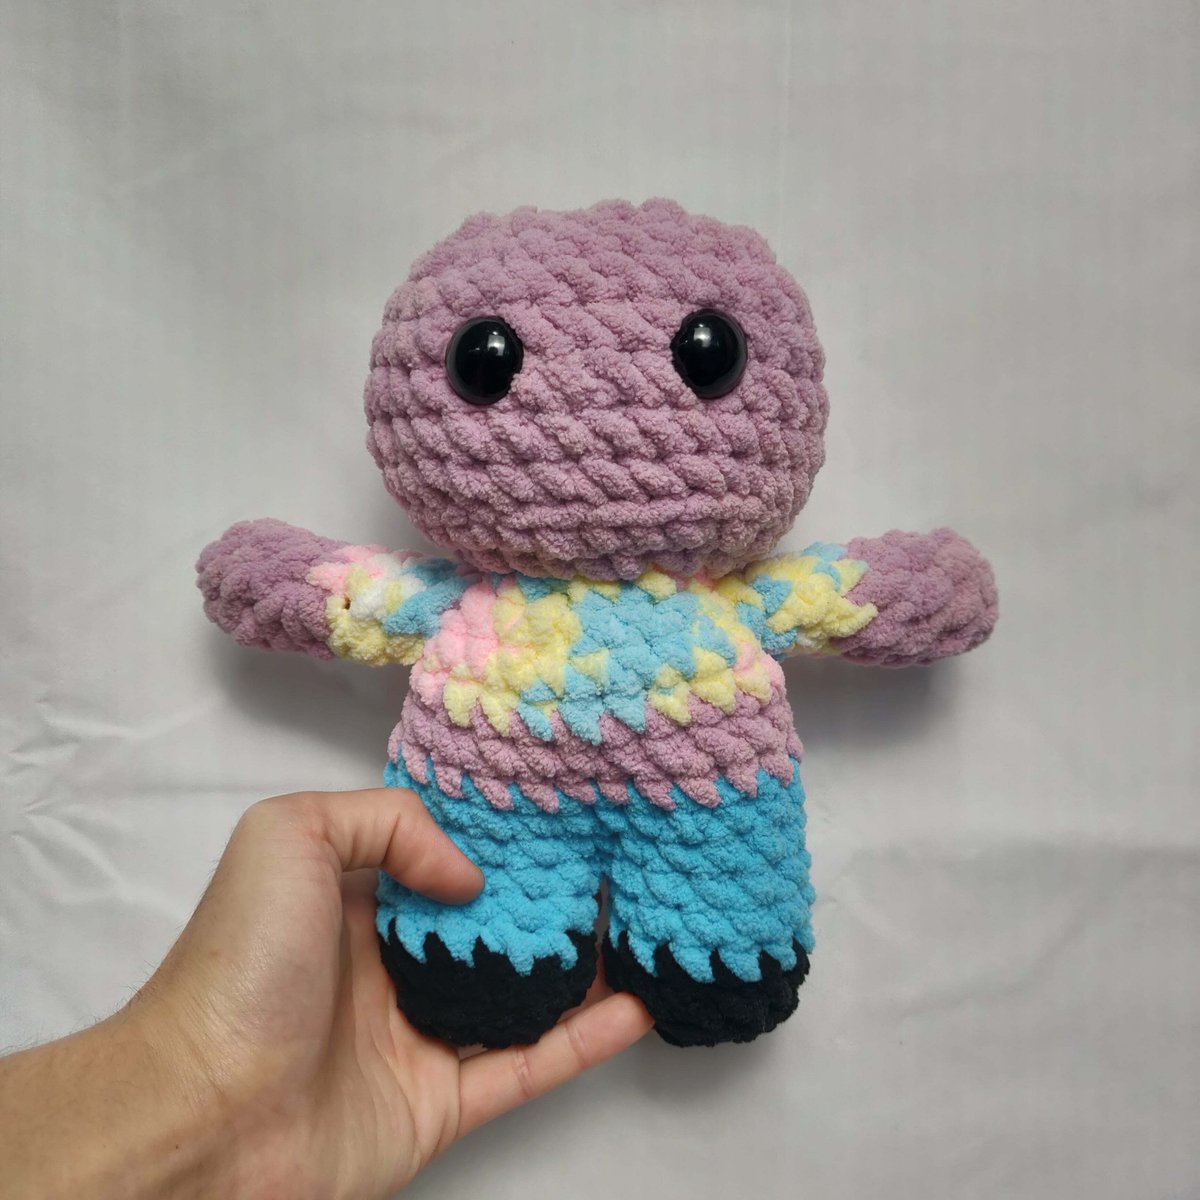 Crochet Brian Doll #1 - $75.00.
guelphmarket.com/products/croch…

Tag a friend or give this share! 

#transgender #canadianbusiness